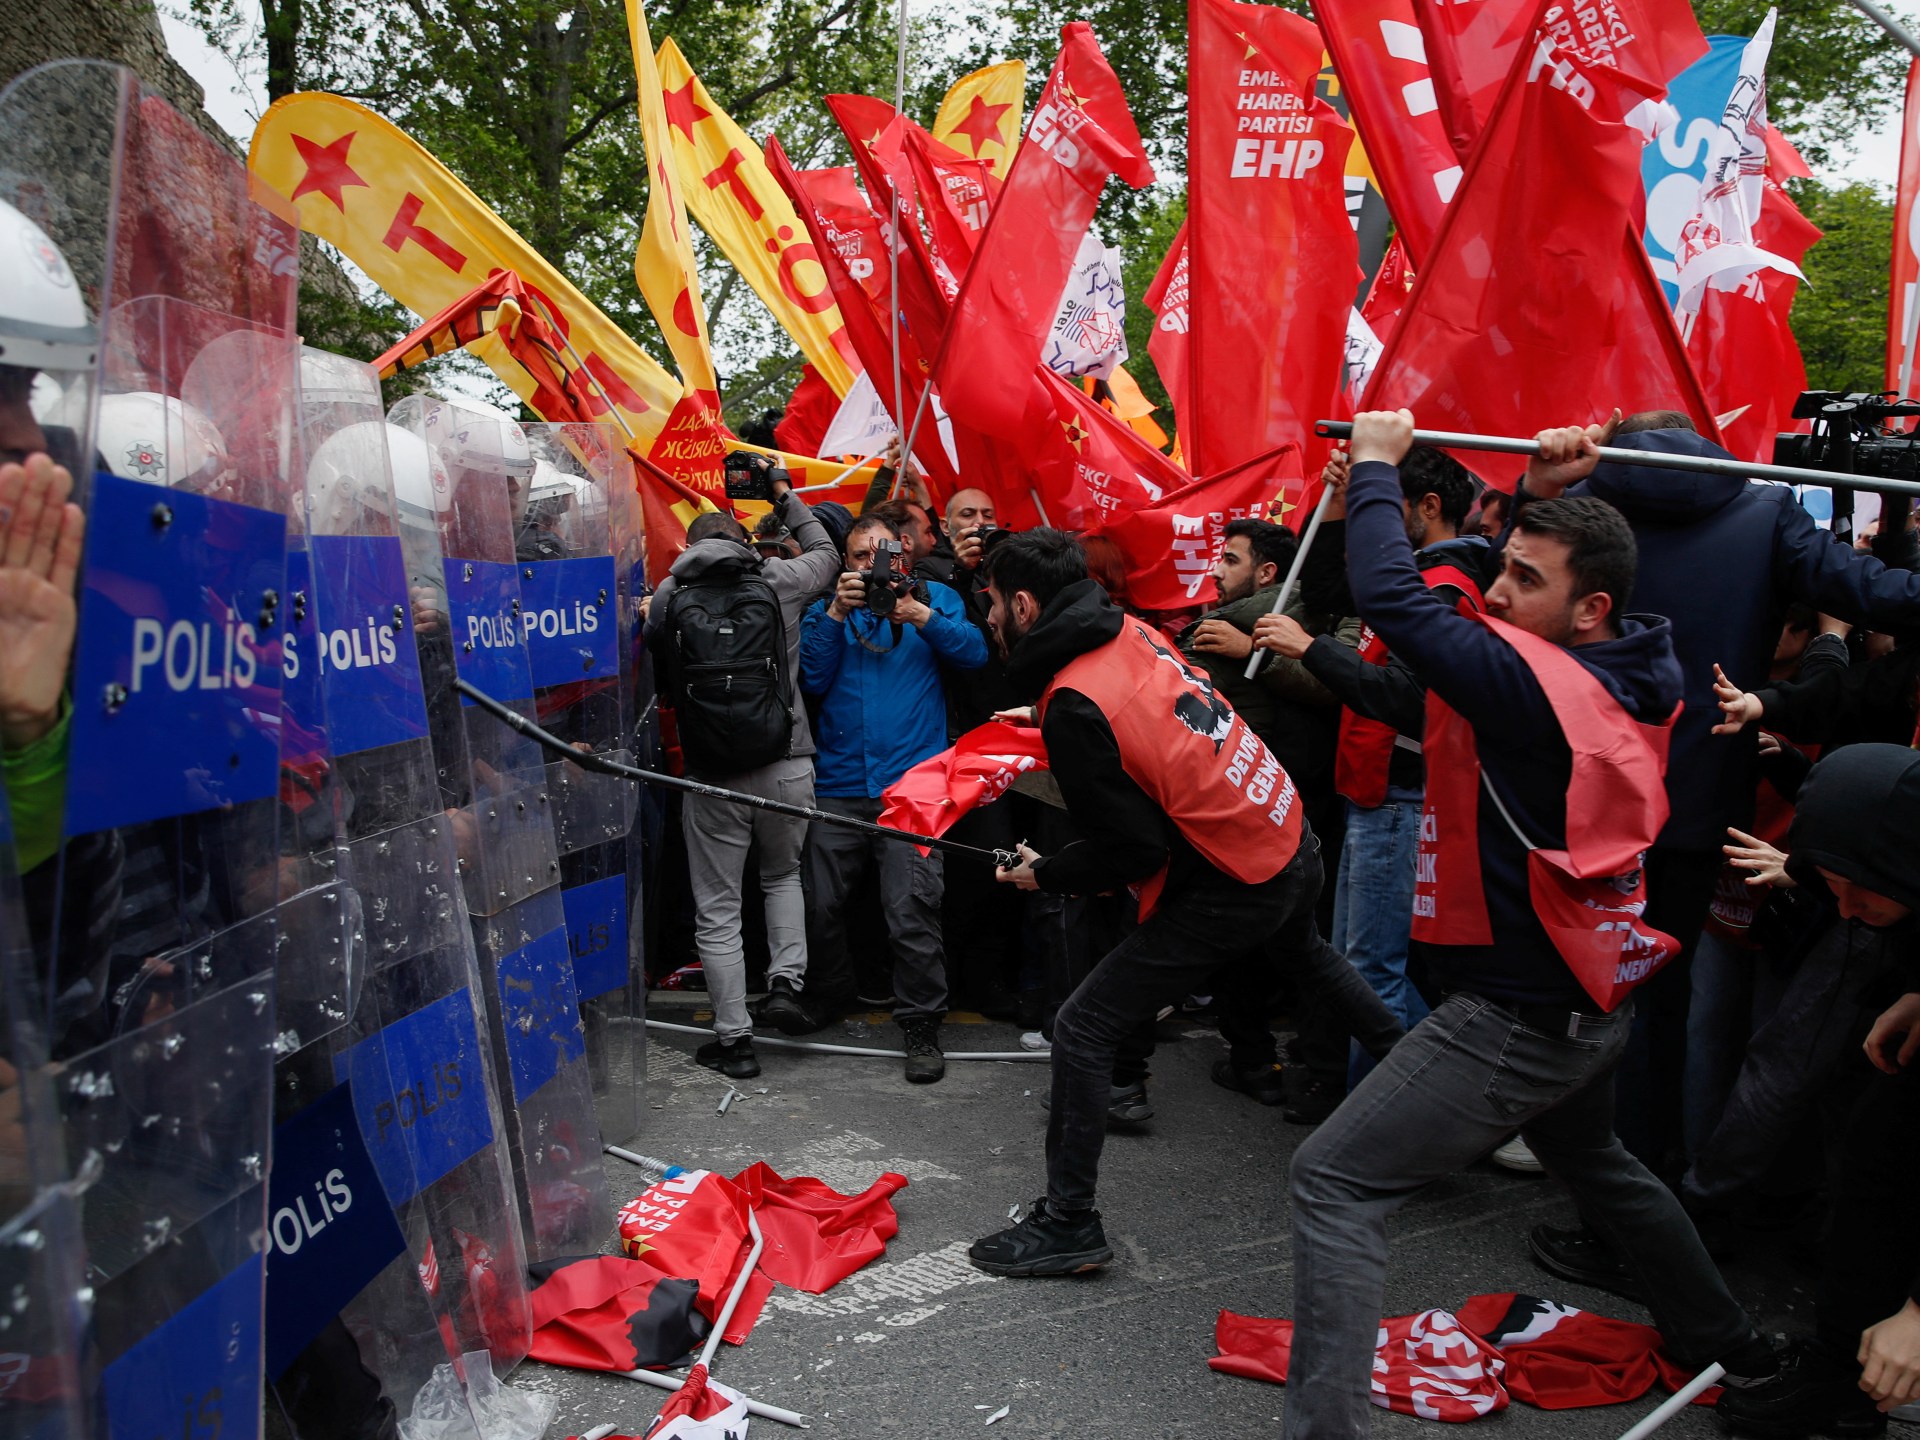 At least 200 arrested at May Day clashes in Turkey